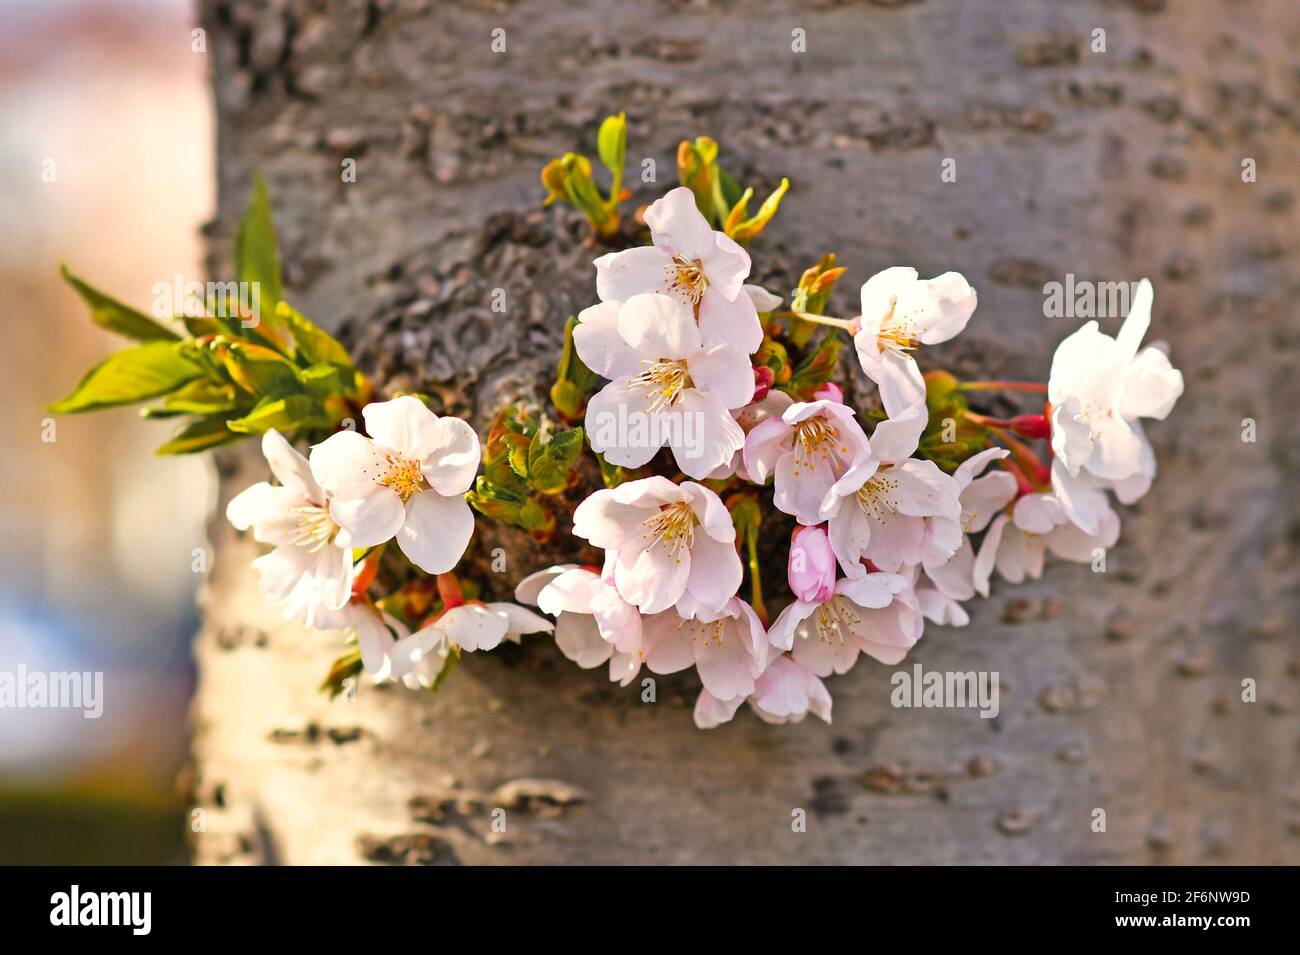 Flowers of japanese 'Somei Yoshino' cherry blossom tree growing from trunk Stock Photo